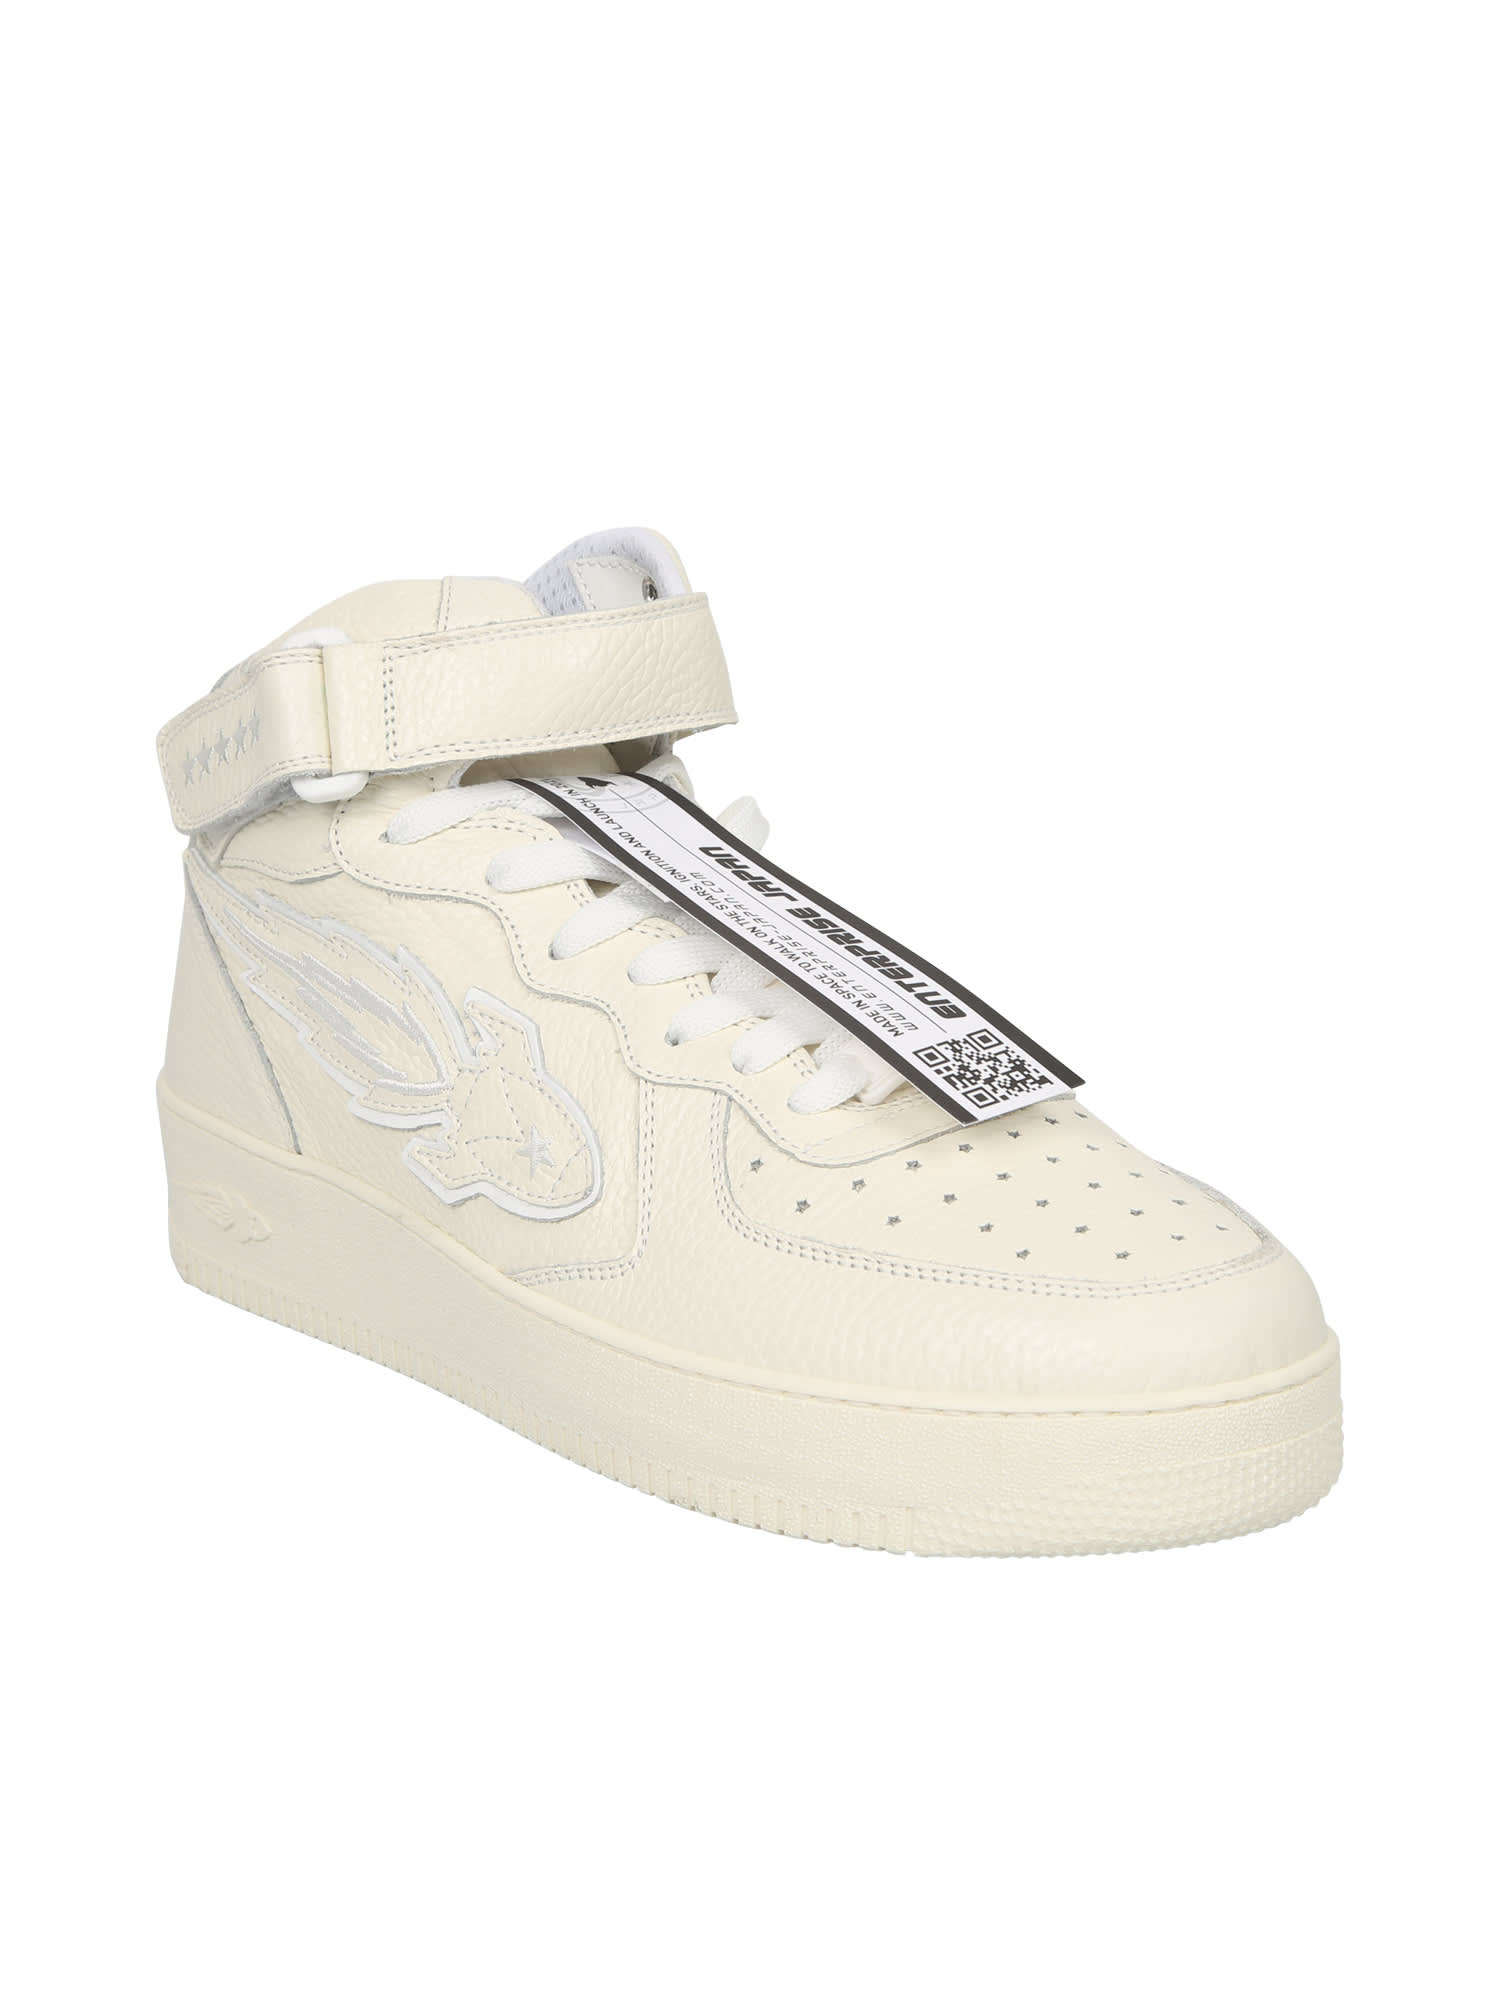 Shop Enterprise Japan Leather Sneakers In White